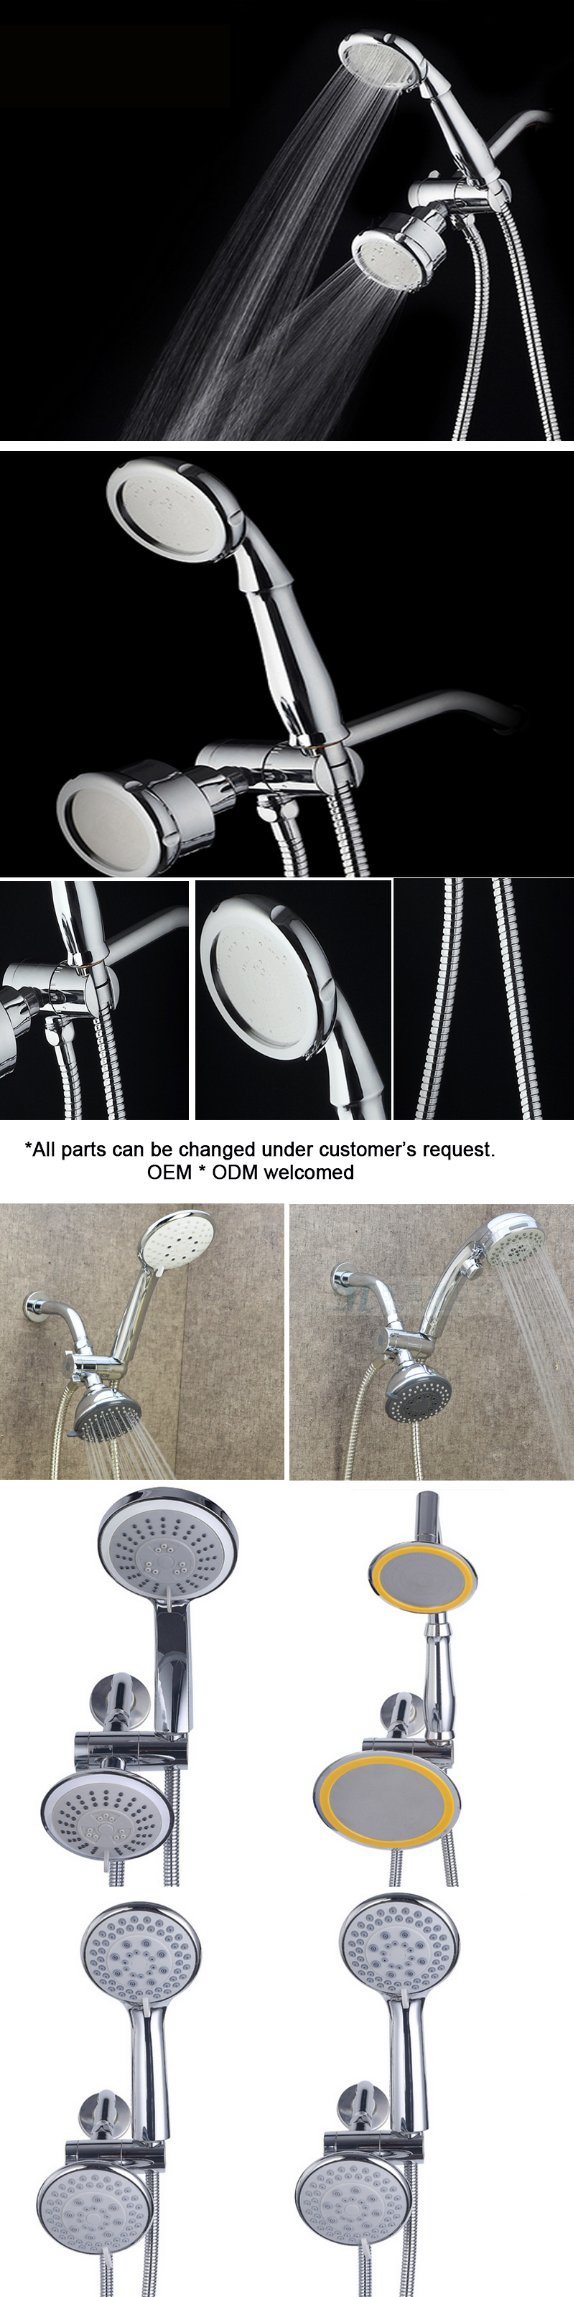 Nickel Brushed Handheld Showerhead and Overhead Rain Shower Combo Set Includes Wall Suction Bracket and 3-Way Diverter Shower Hose